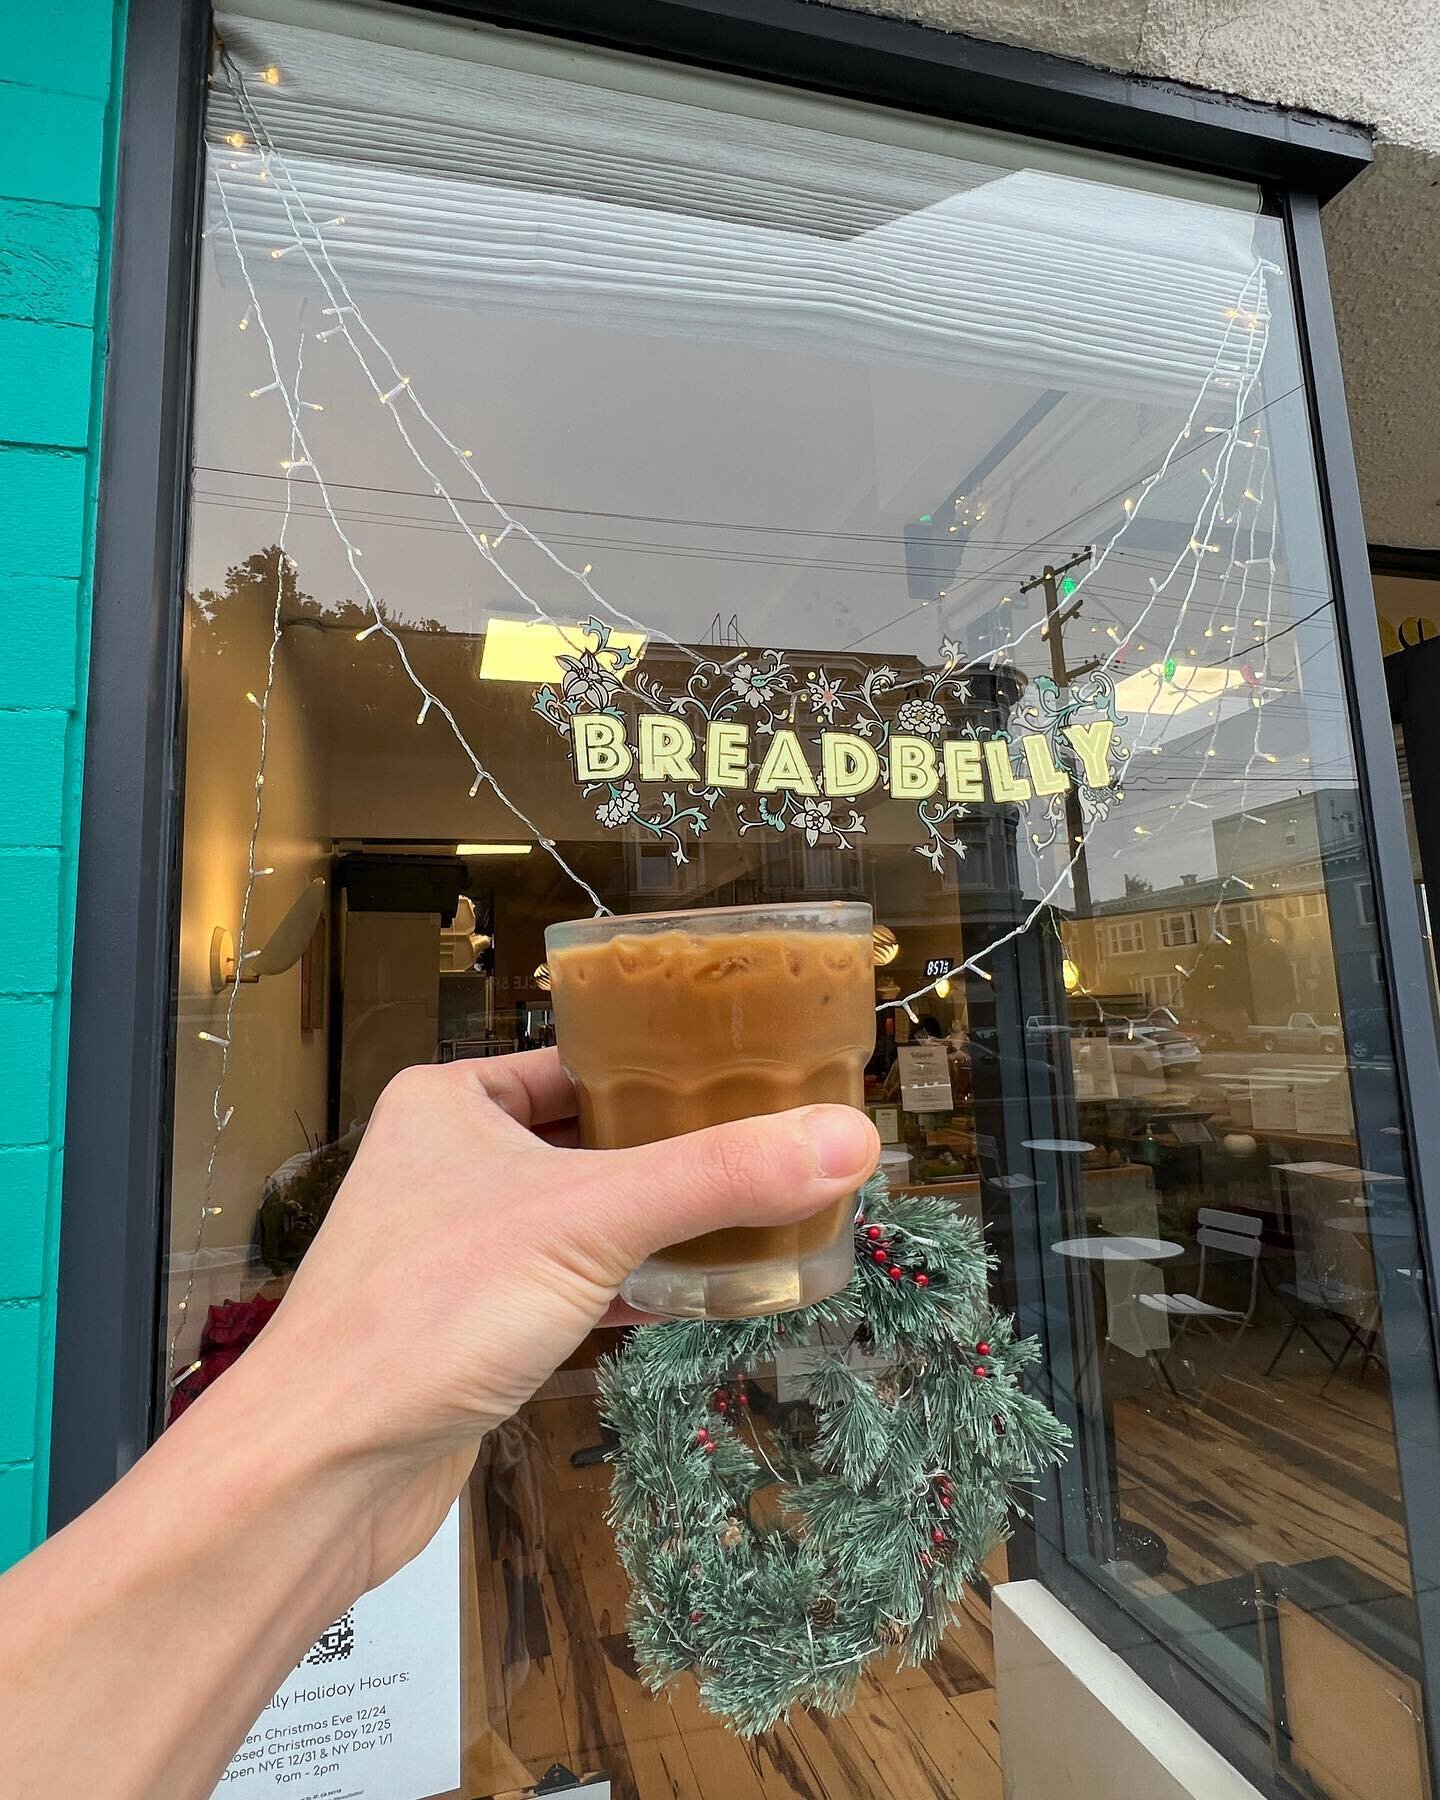 🖐🥳 Breadbelly is 5 years old! Thank you thank you thank you for all the support and encouragement along the way! Stop by to wish us happy birthday today, we&rsquo;re celebrating with mini kaya buns and 50/50 on us!